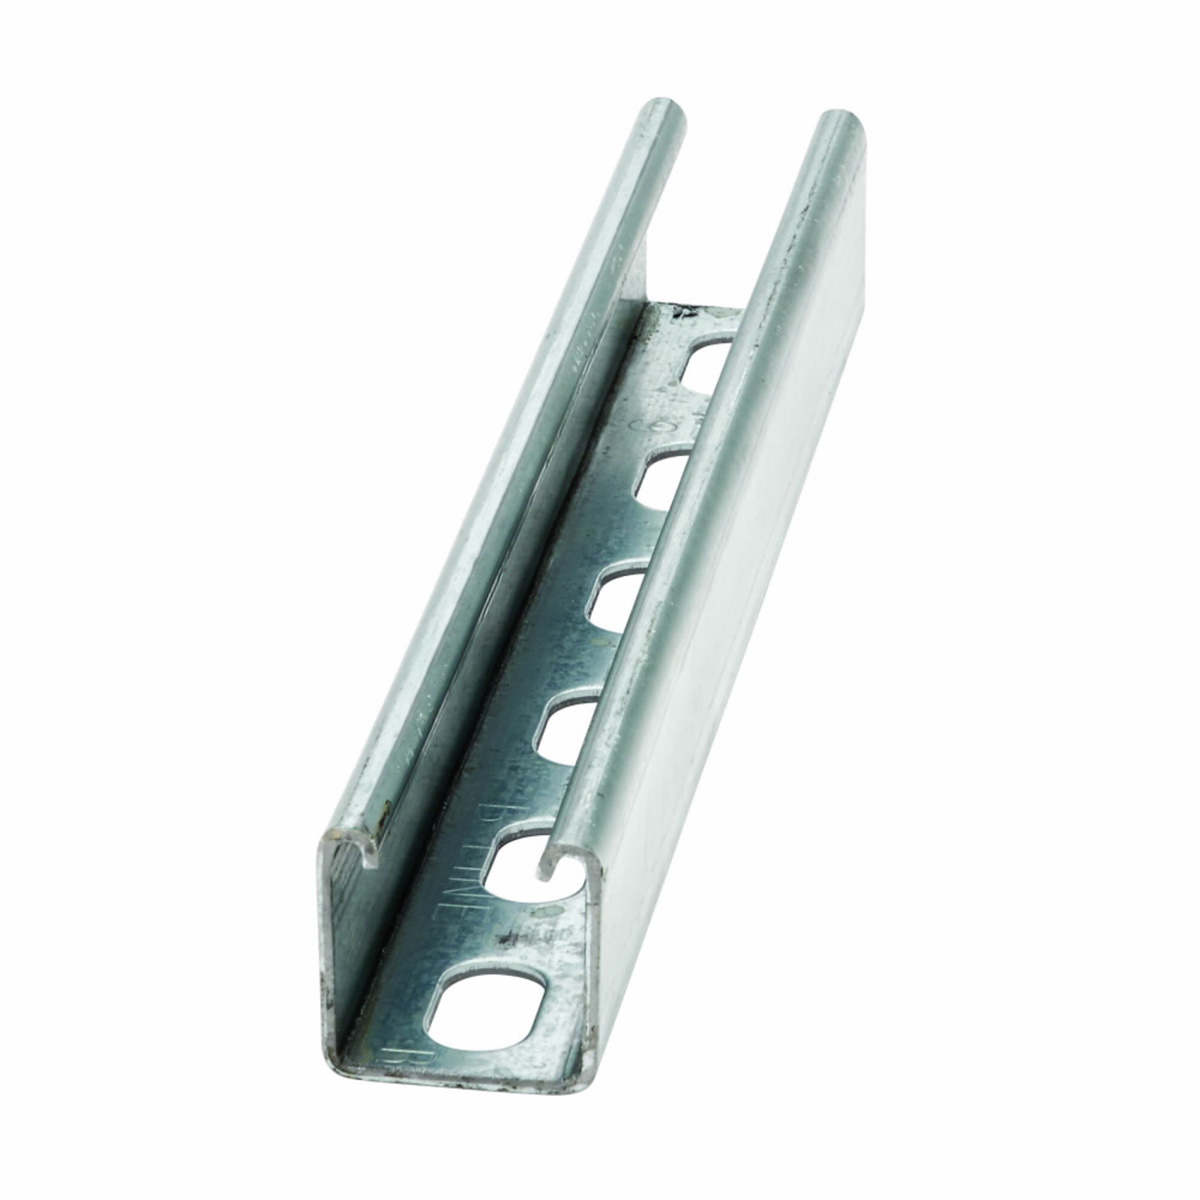 Eaton Slotted Pre-Galvanized Short Strut Channels from Columbia Safety